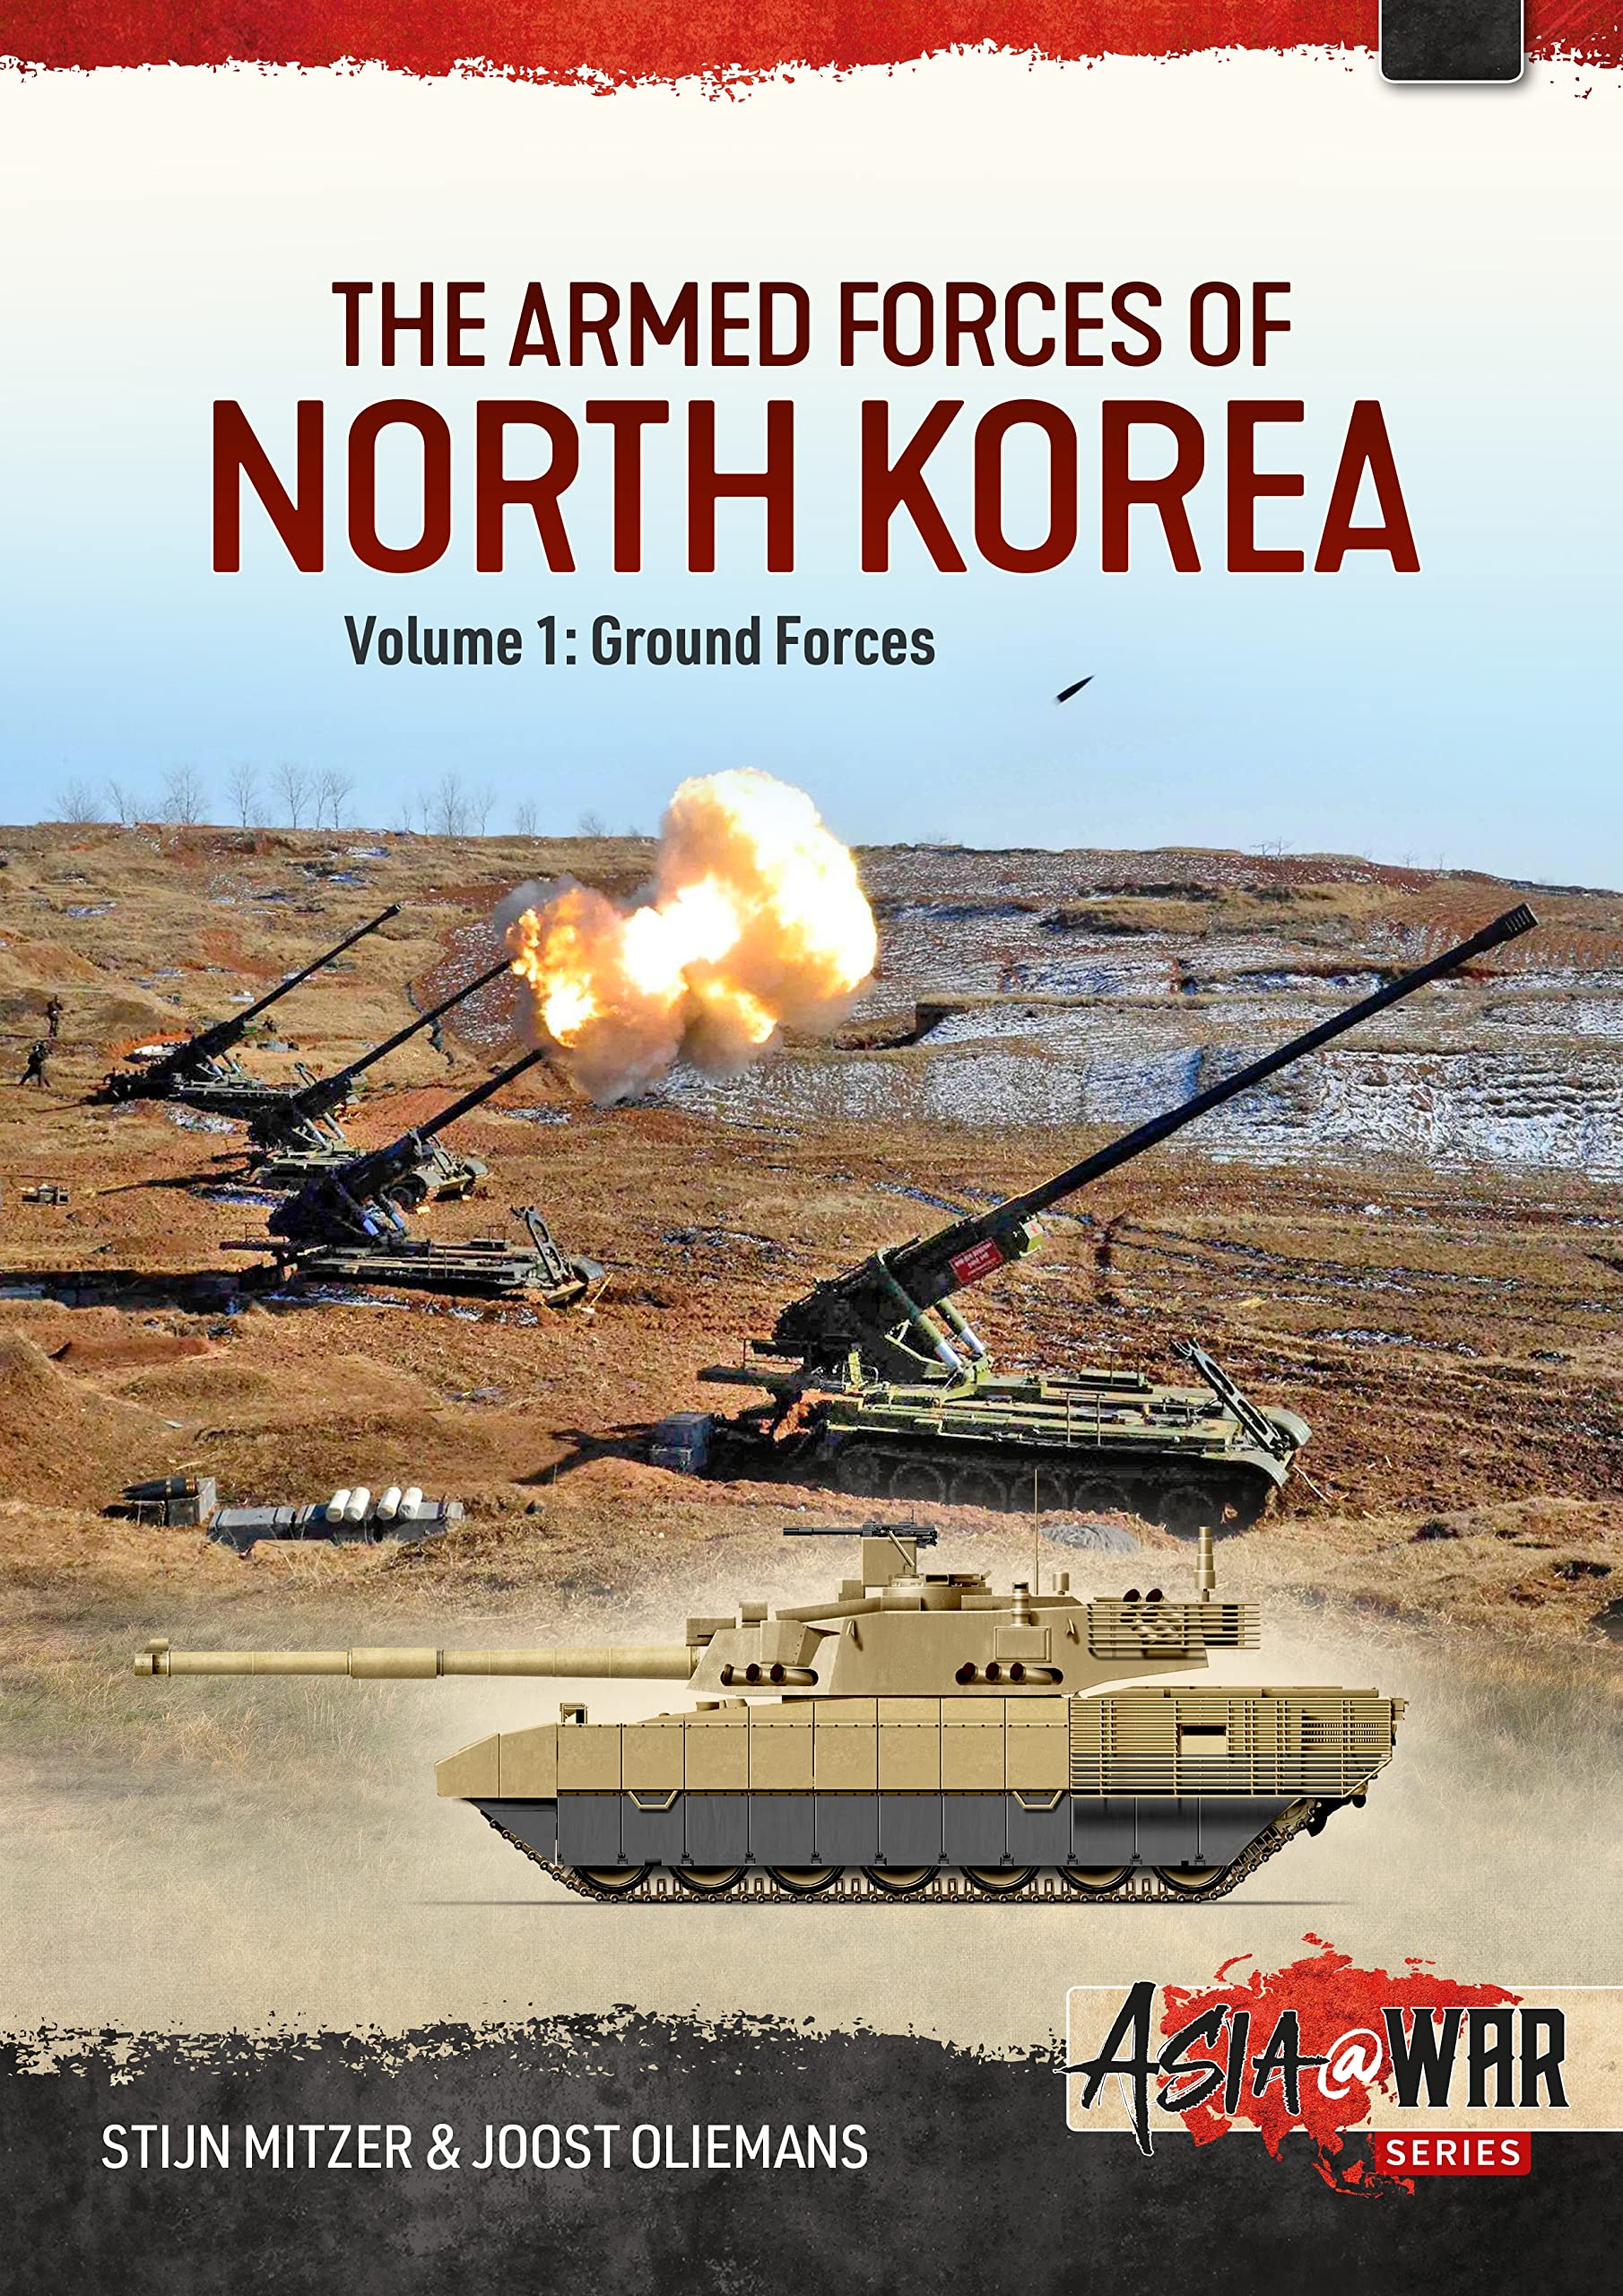 The Armed Forces of North Korea : Volume 1 - Ground Forces (Paperback)